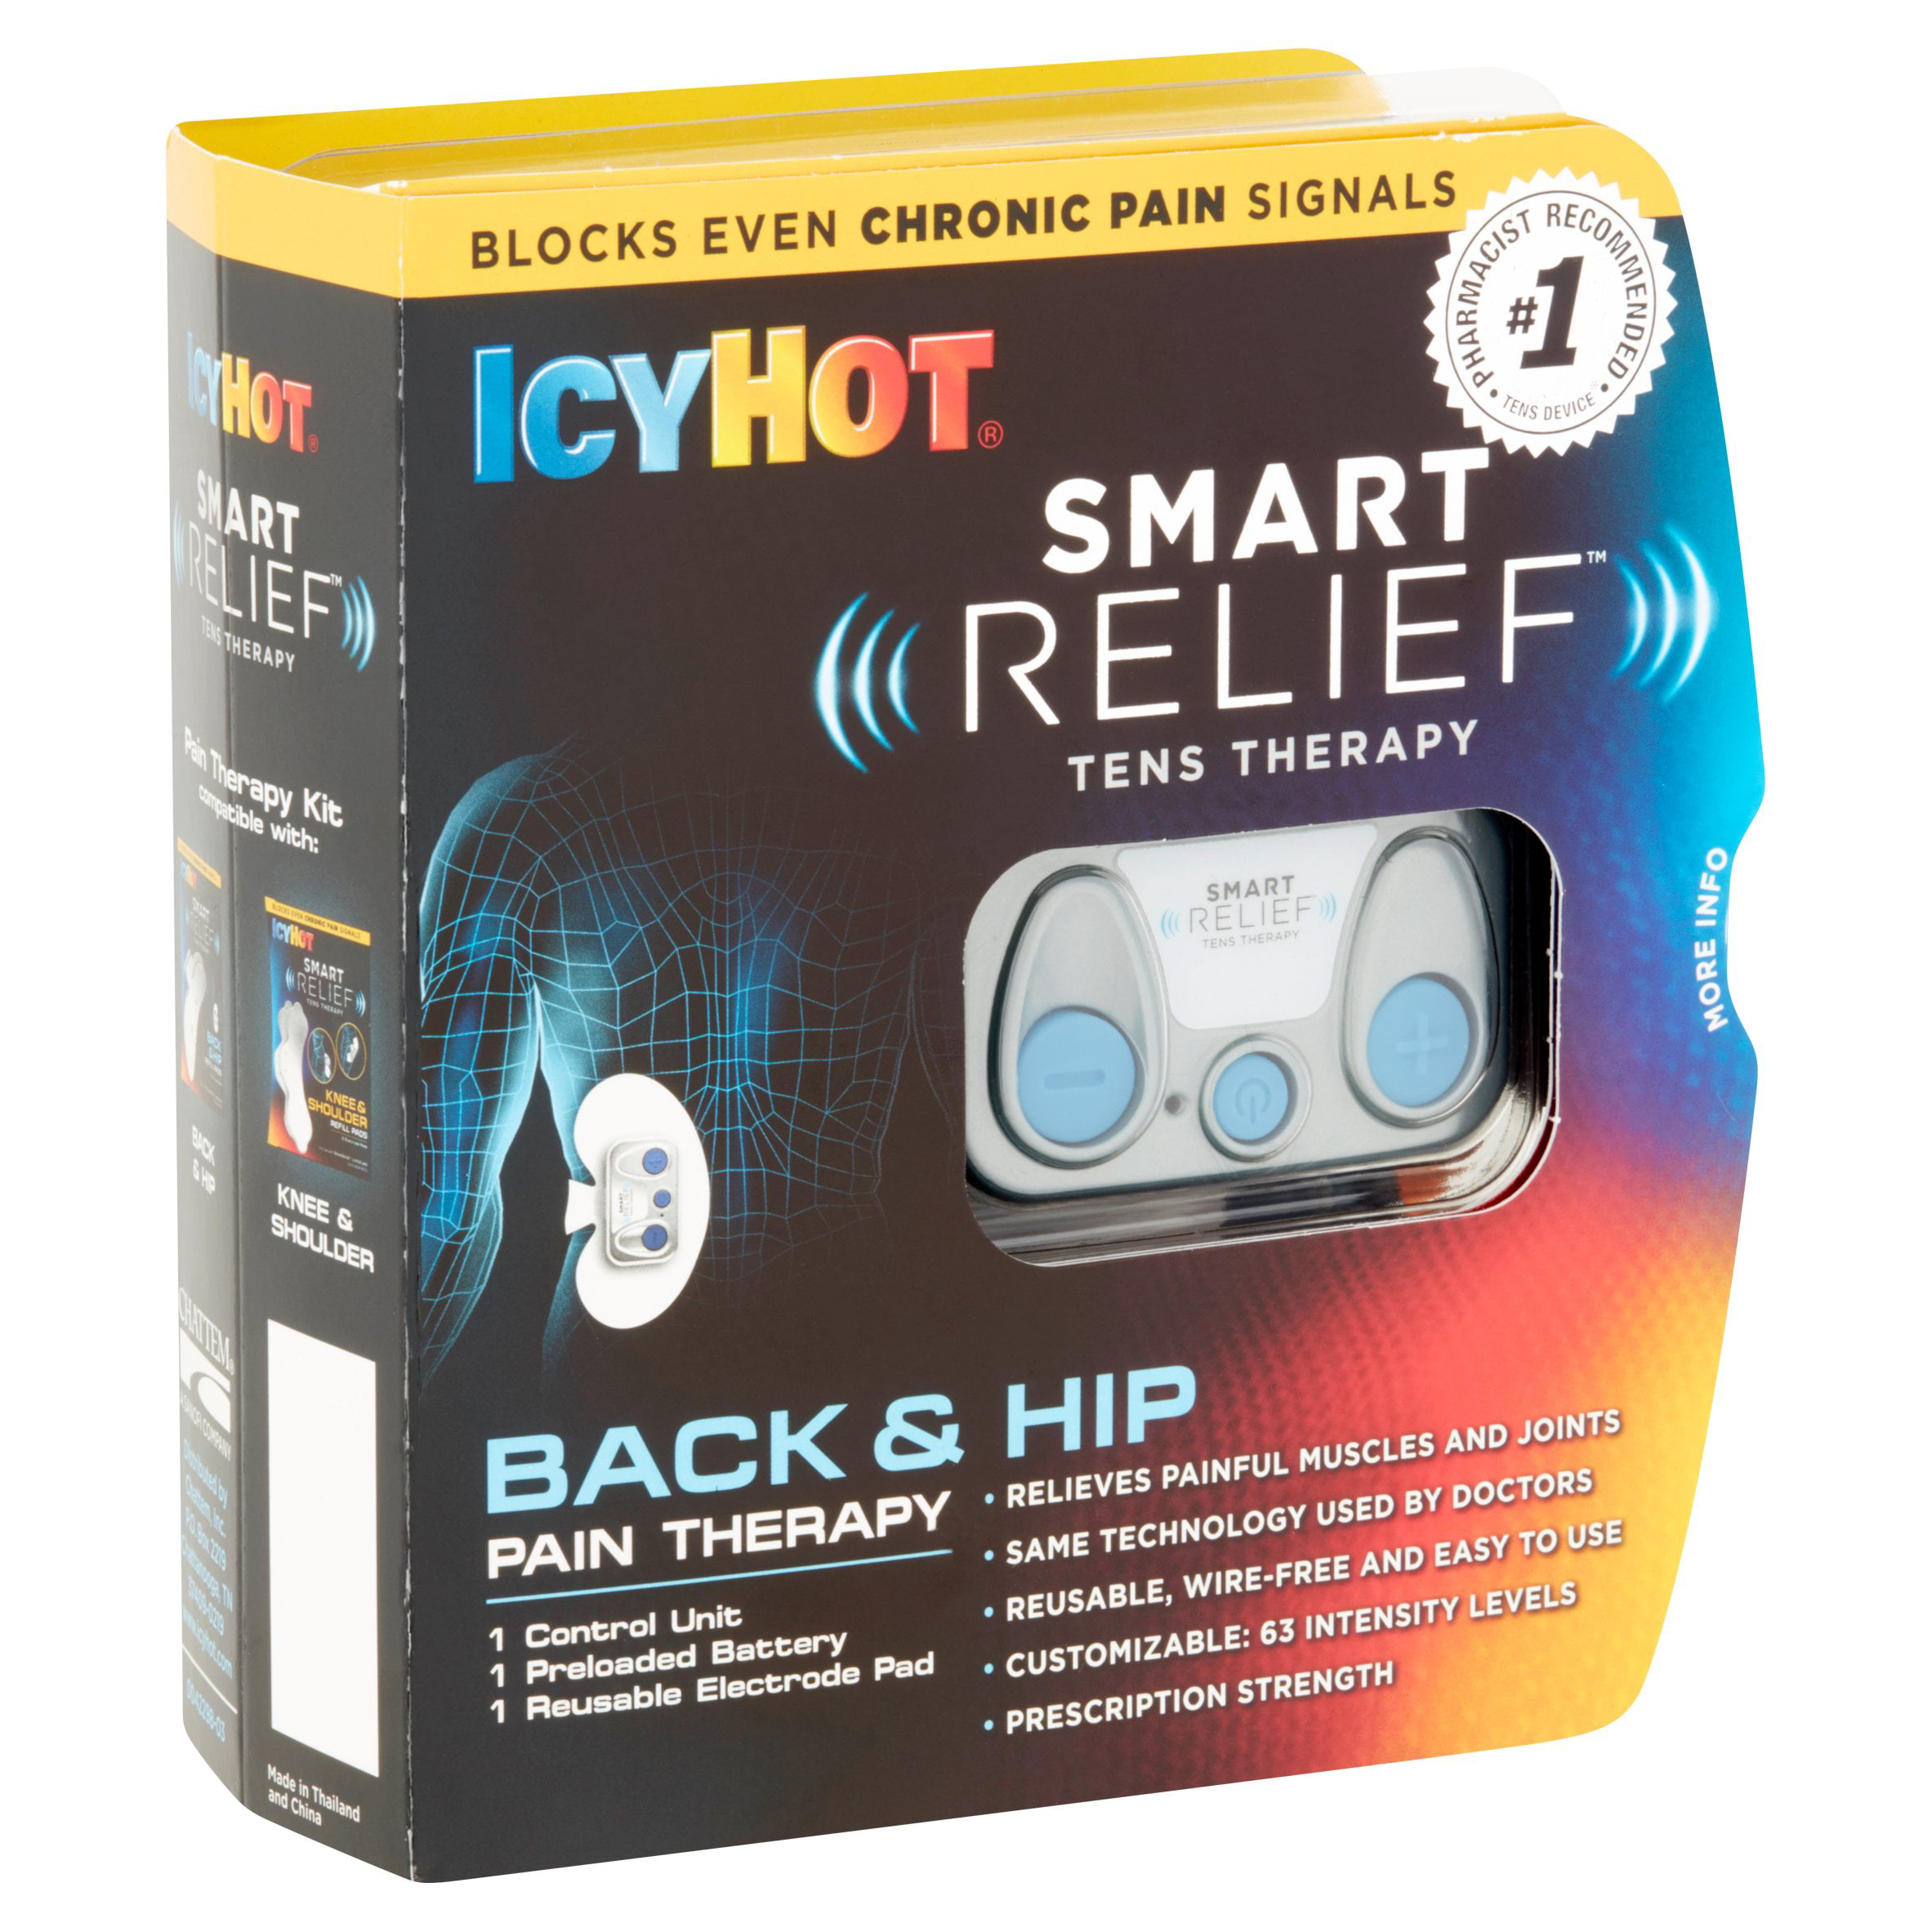 Icy Hot Smart Relief Tens Therapy Back Pain Therapy Exp 12/30/2016 New Seal...